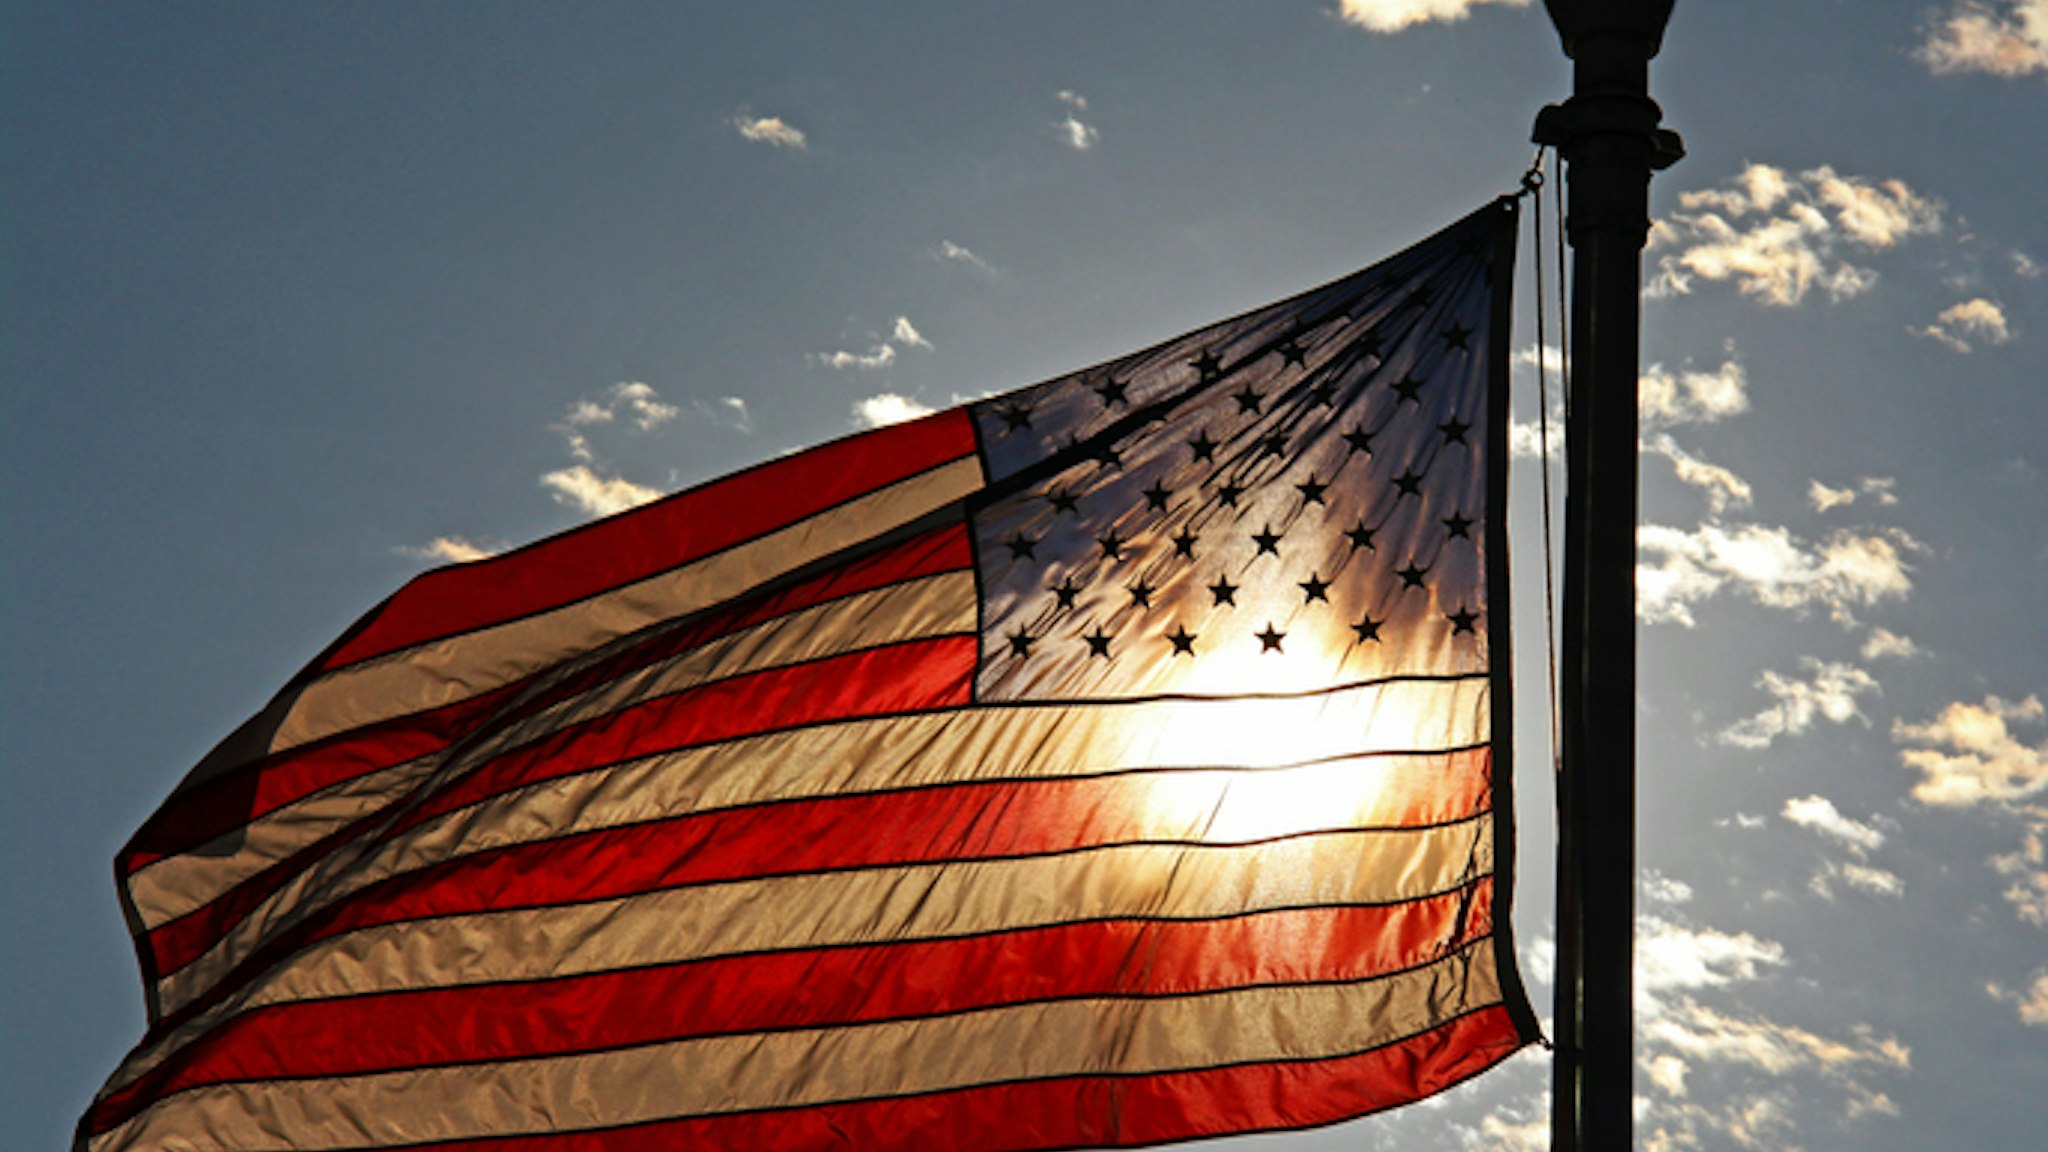 Sun highlights the colors of the american flag.